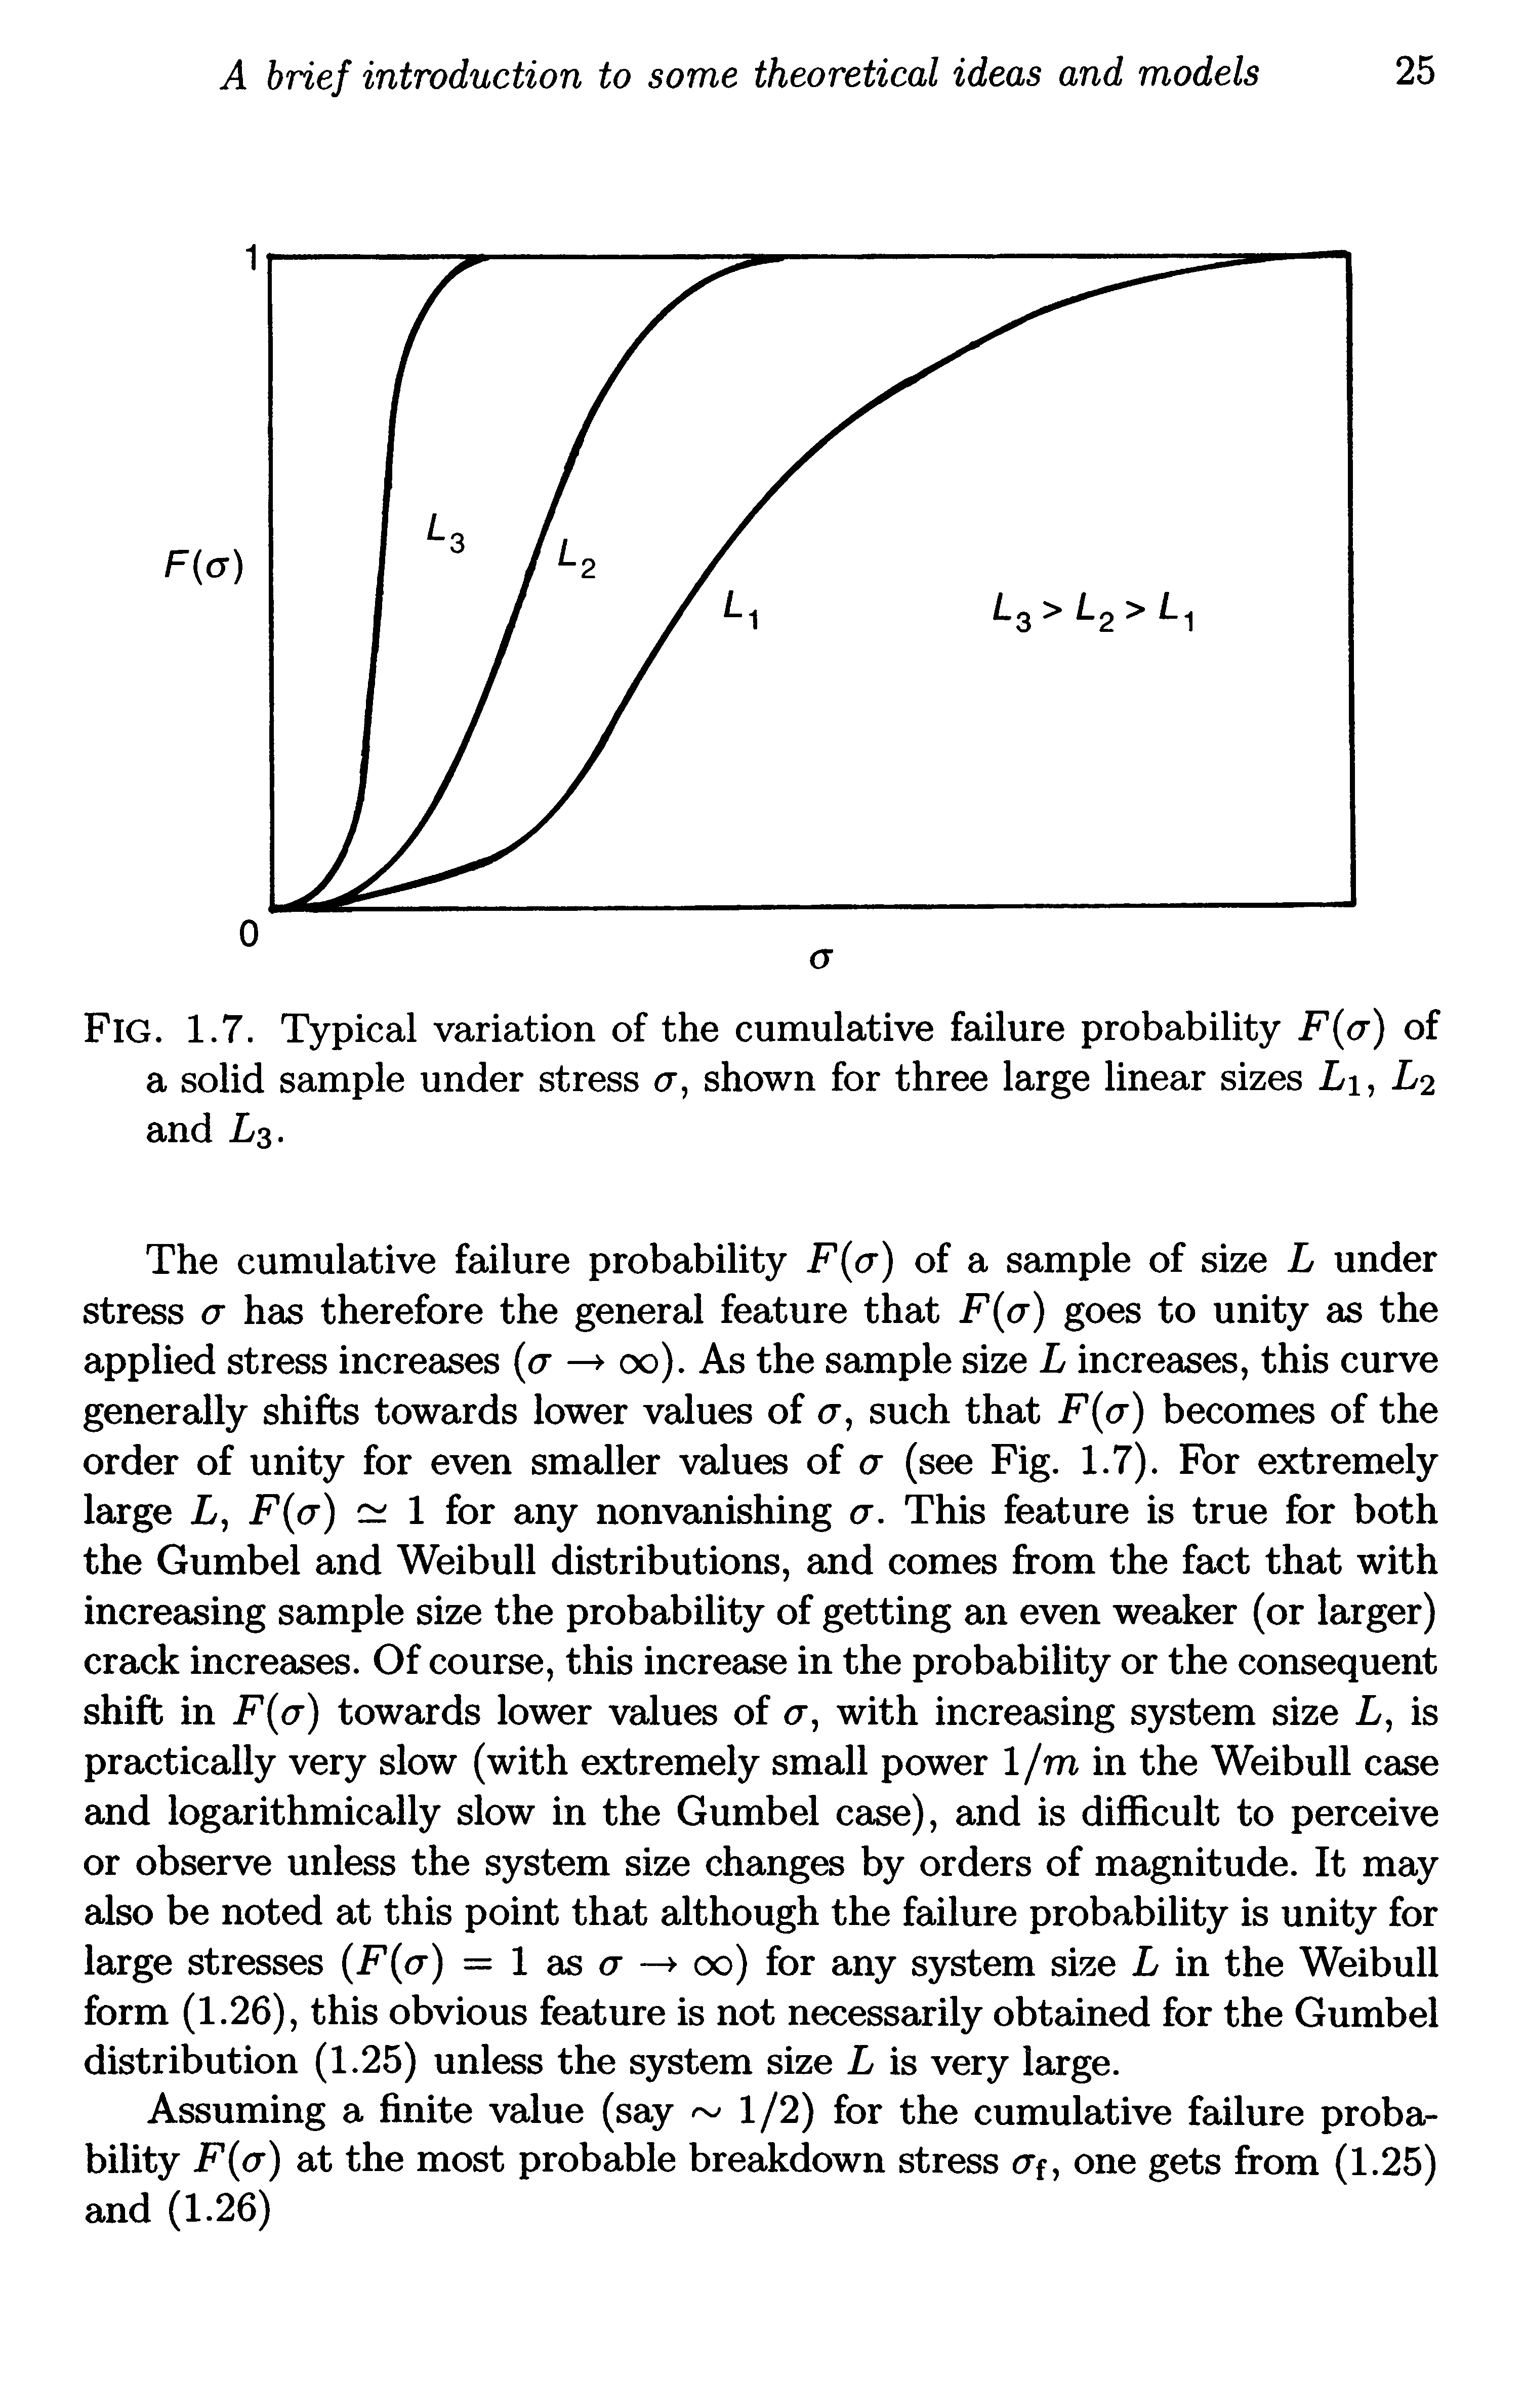 Fig. 1.7. Typical variation of the cumulative failure probability F a) of a solid sample under stress cr, shown for three large linear sizes Li, L2 and L3.